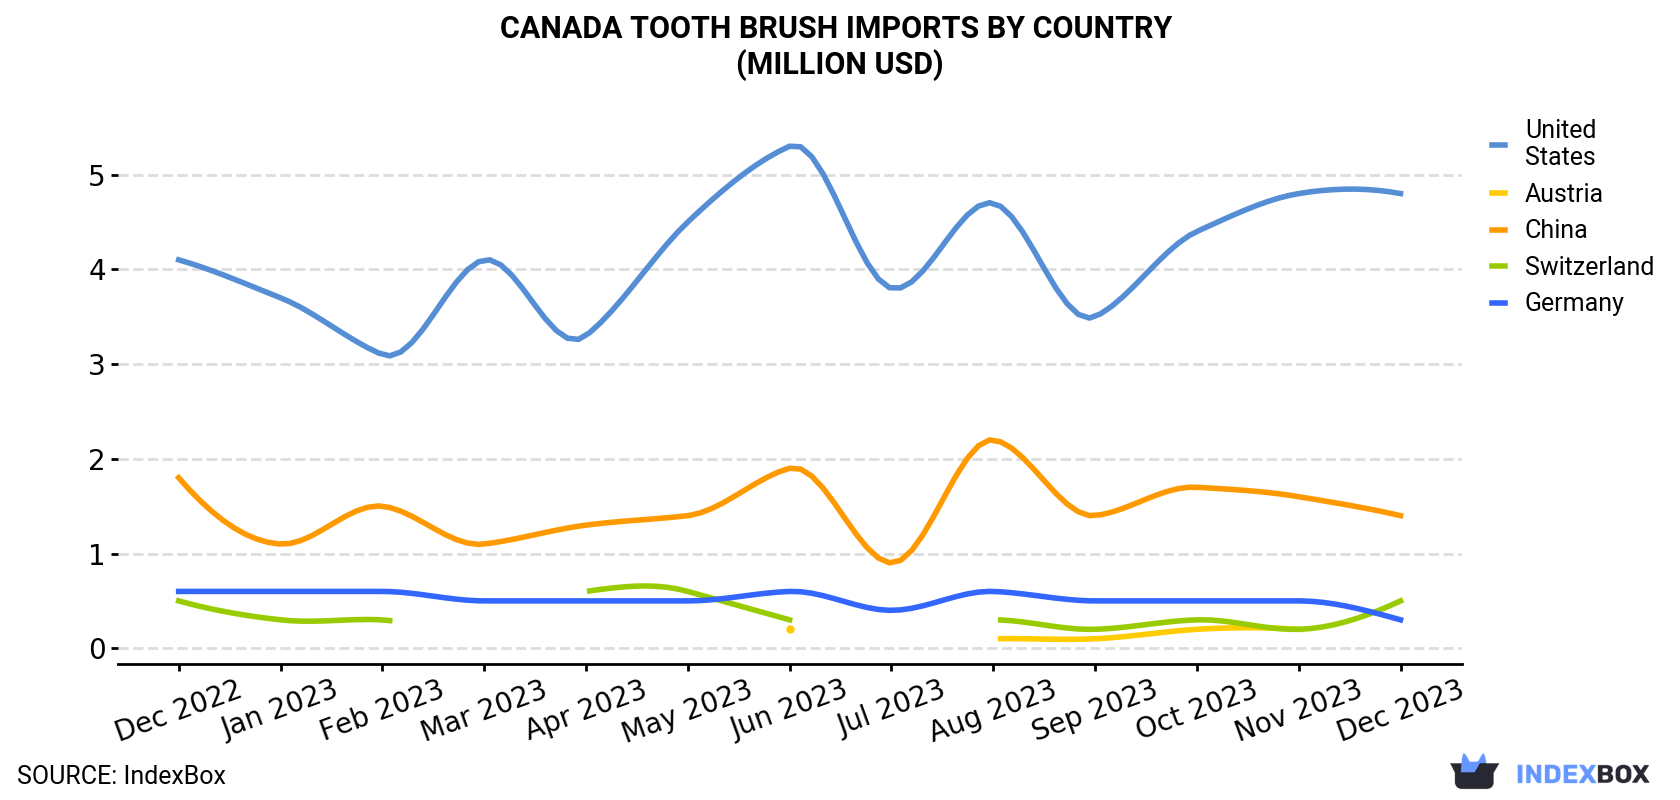 Canada Tooth Brush Imports By Country (Million USD)